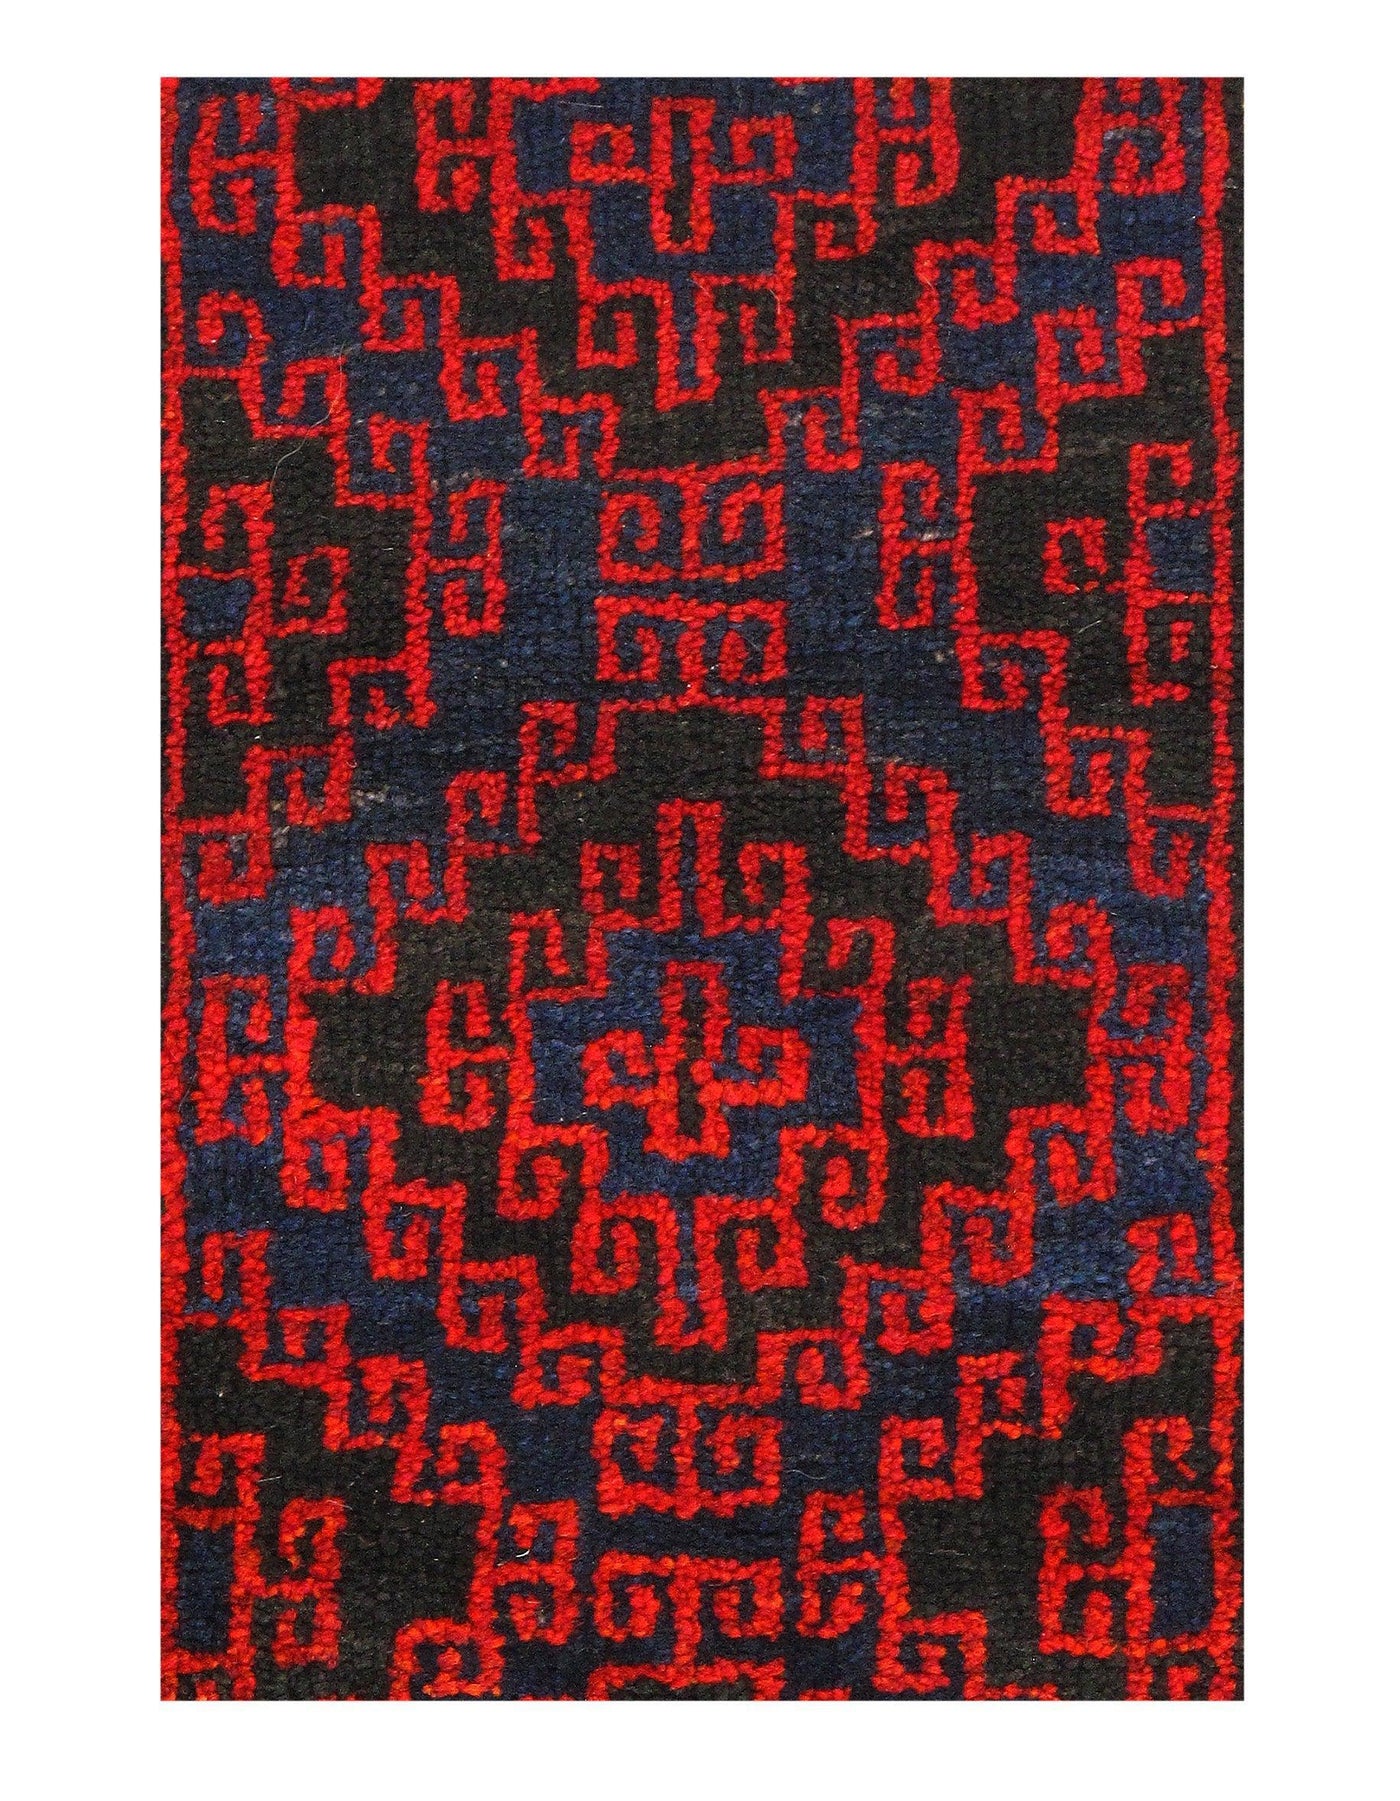 Canvello Persian Shiraz Saddle Bag Hand Knotted Rugs - 2' X 3'7''